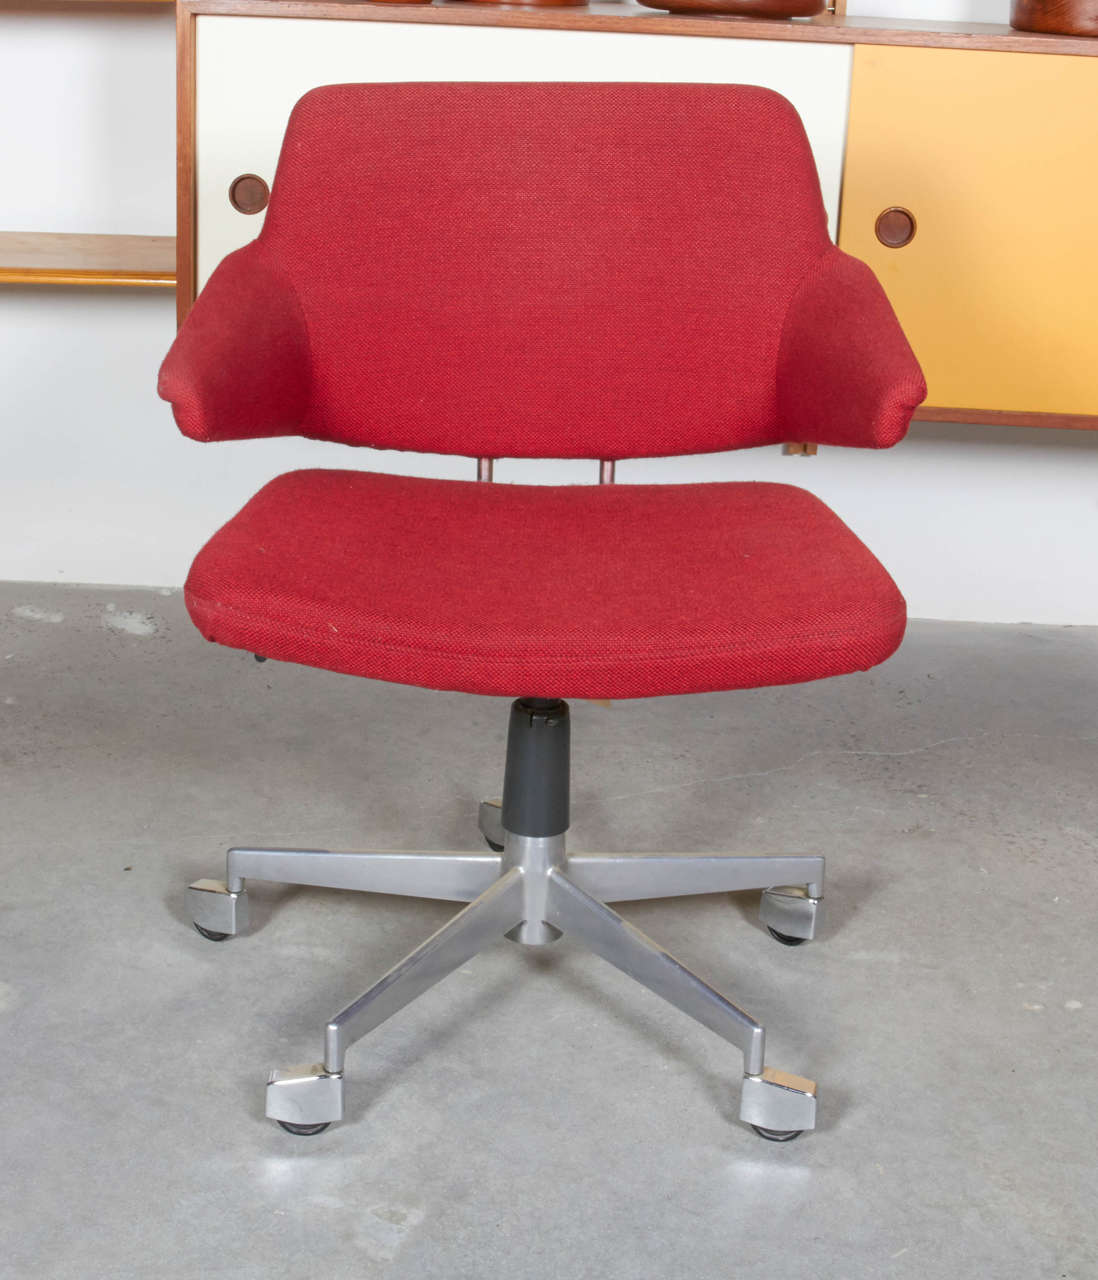 Vintage 1960s Kevi Desk Chair

This Mid Century Office Chair is in excellent condition. Wheels are smooth. Fabric is great or can be re-upholstered to fit your style. Ready for pick up, delivery, or shipping.